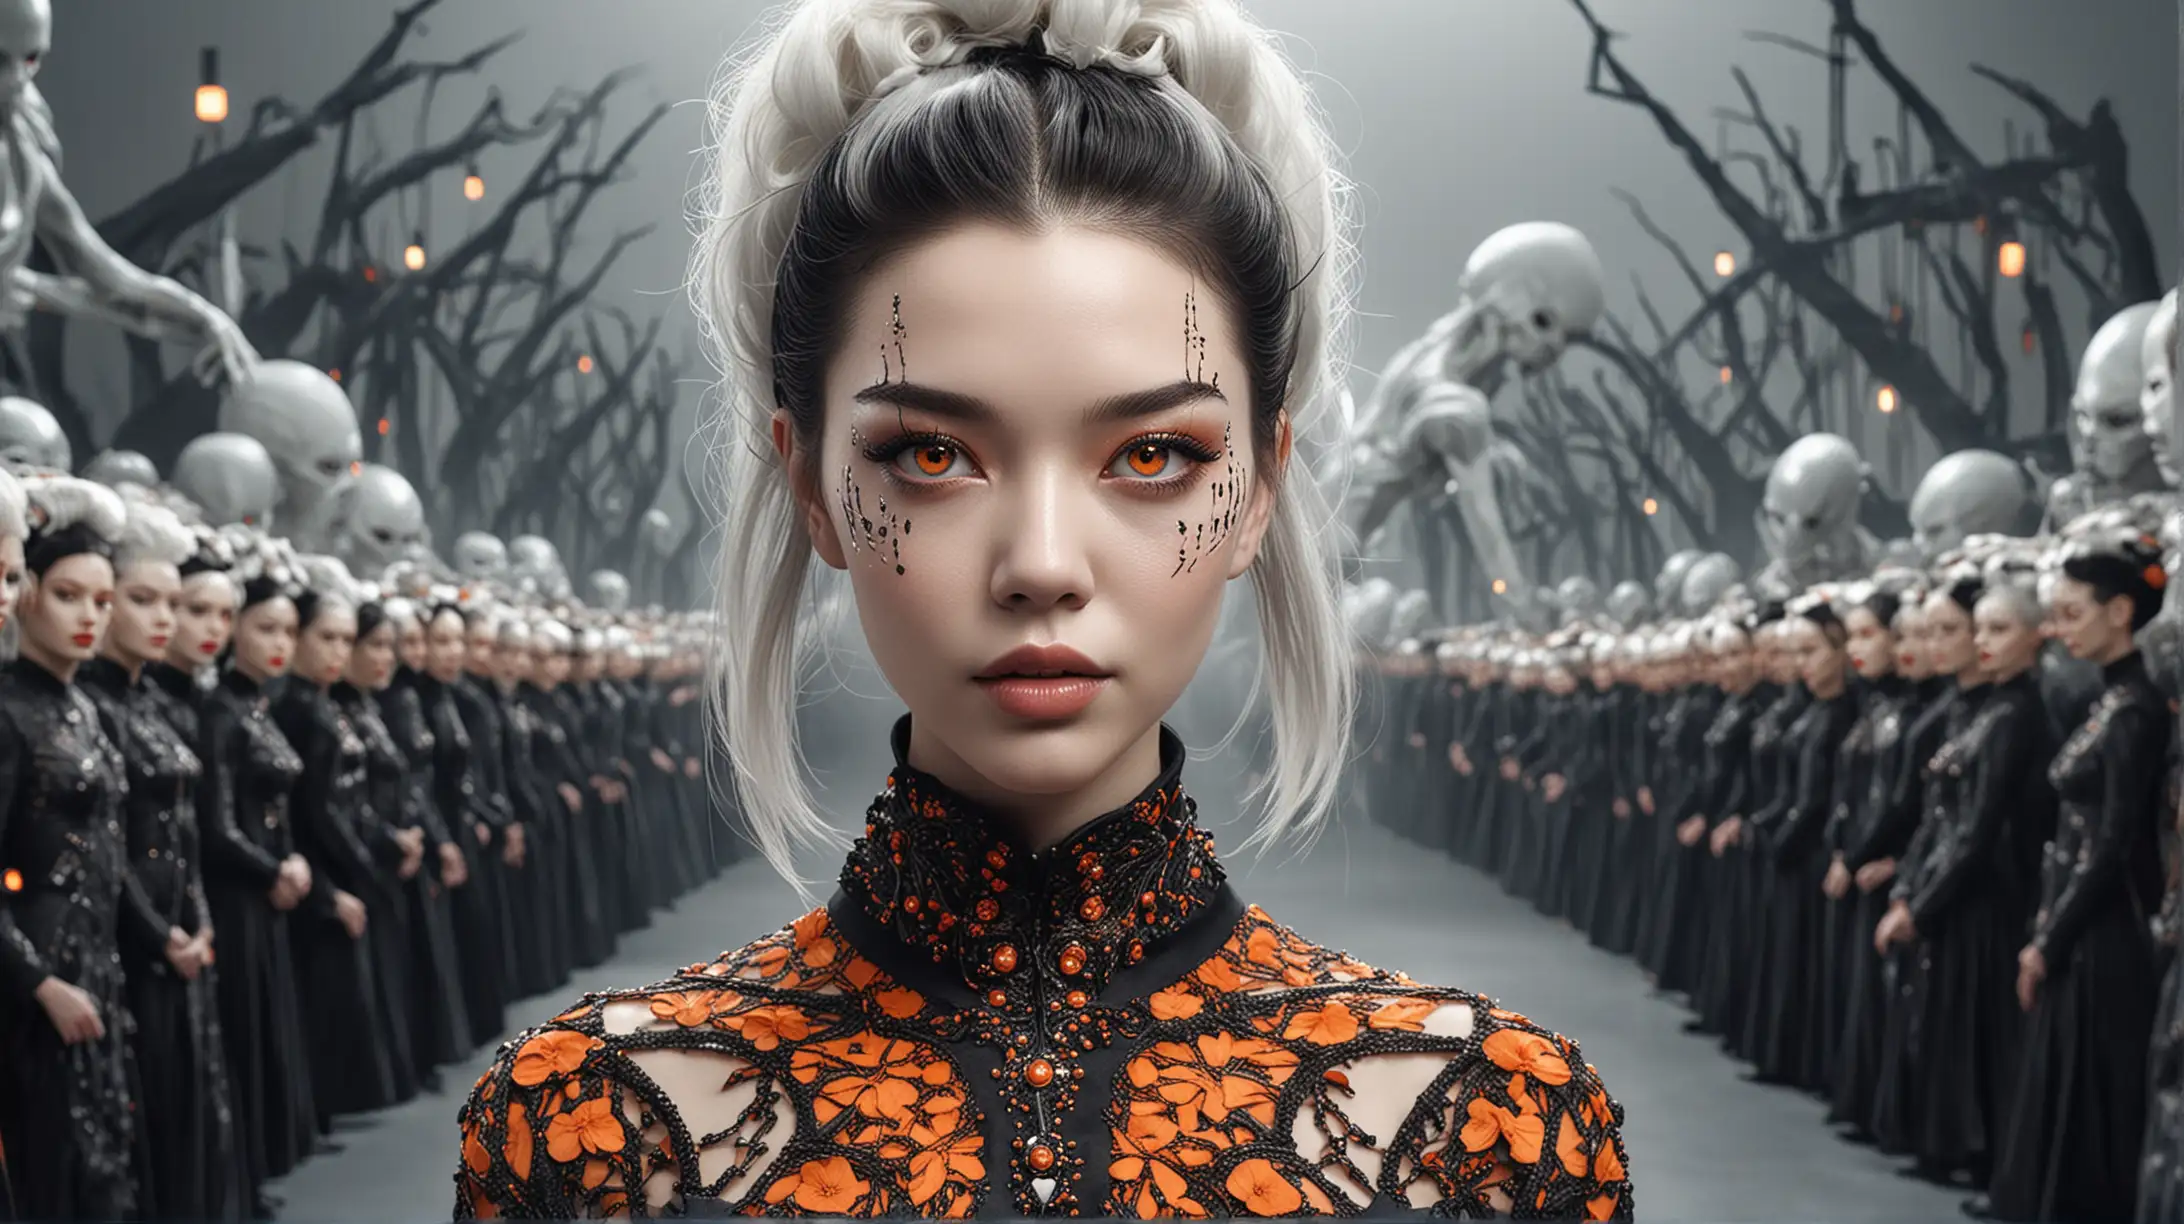 Surreal Fashion Show Asian Woman in Digital Art Style with Alien Landscape